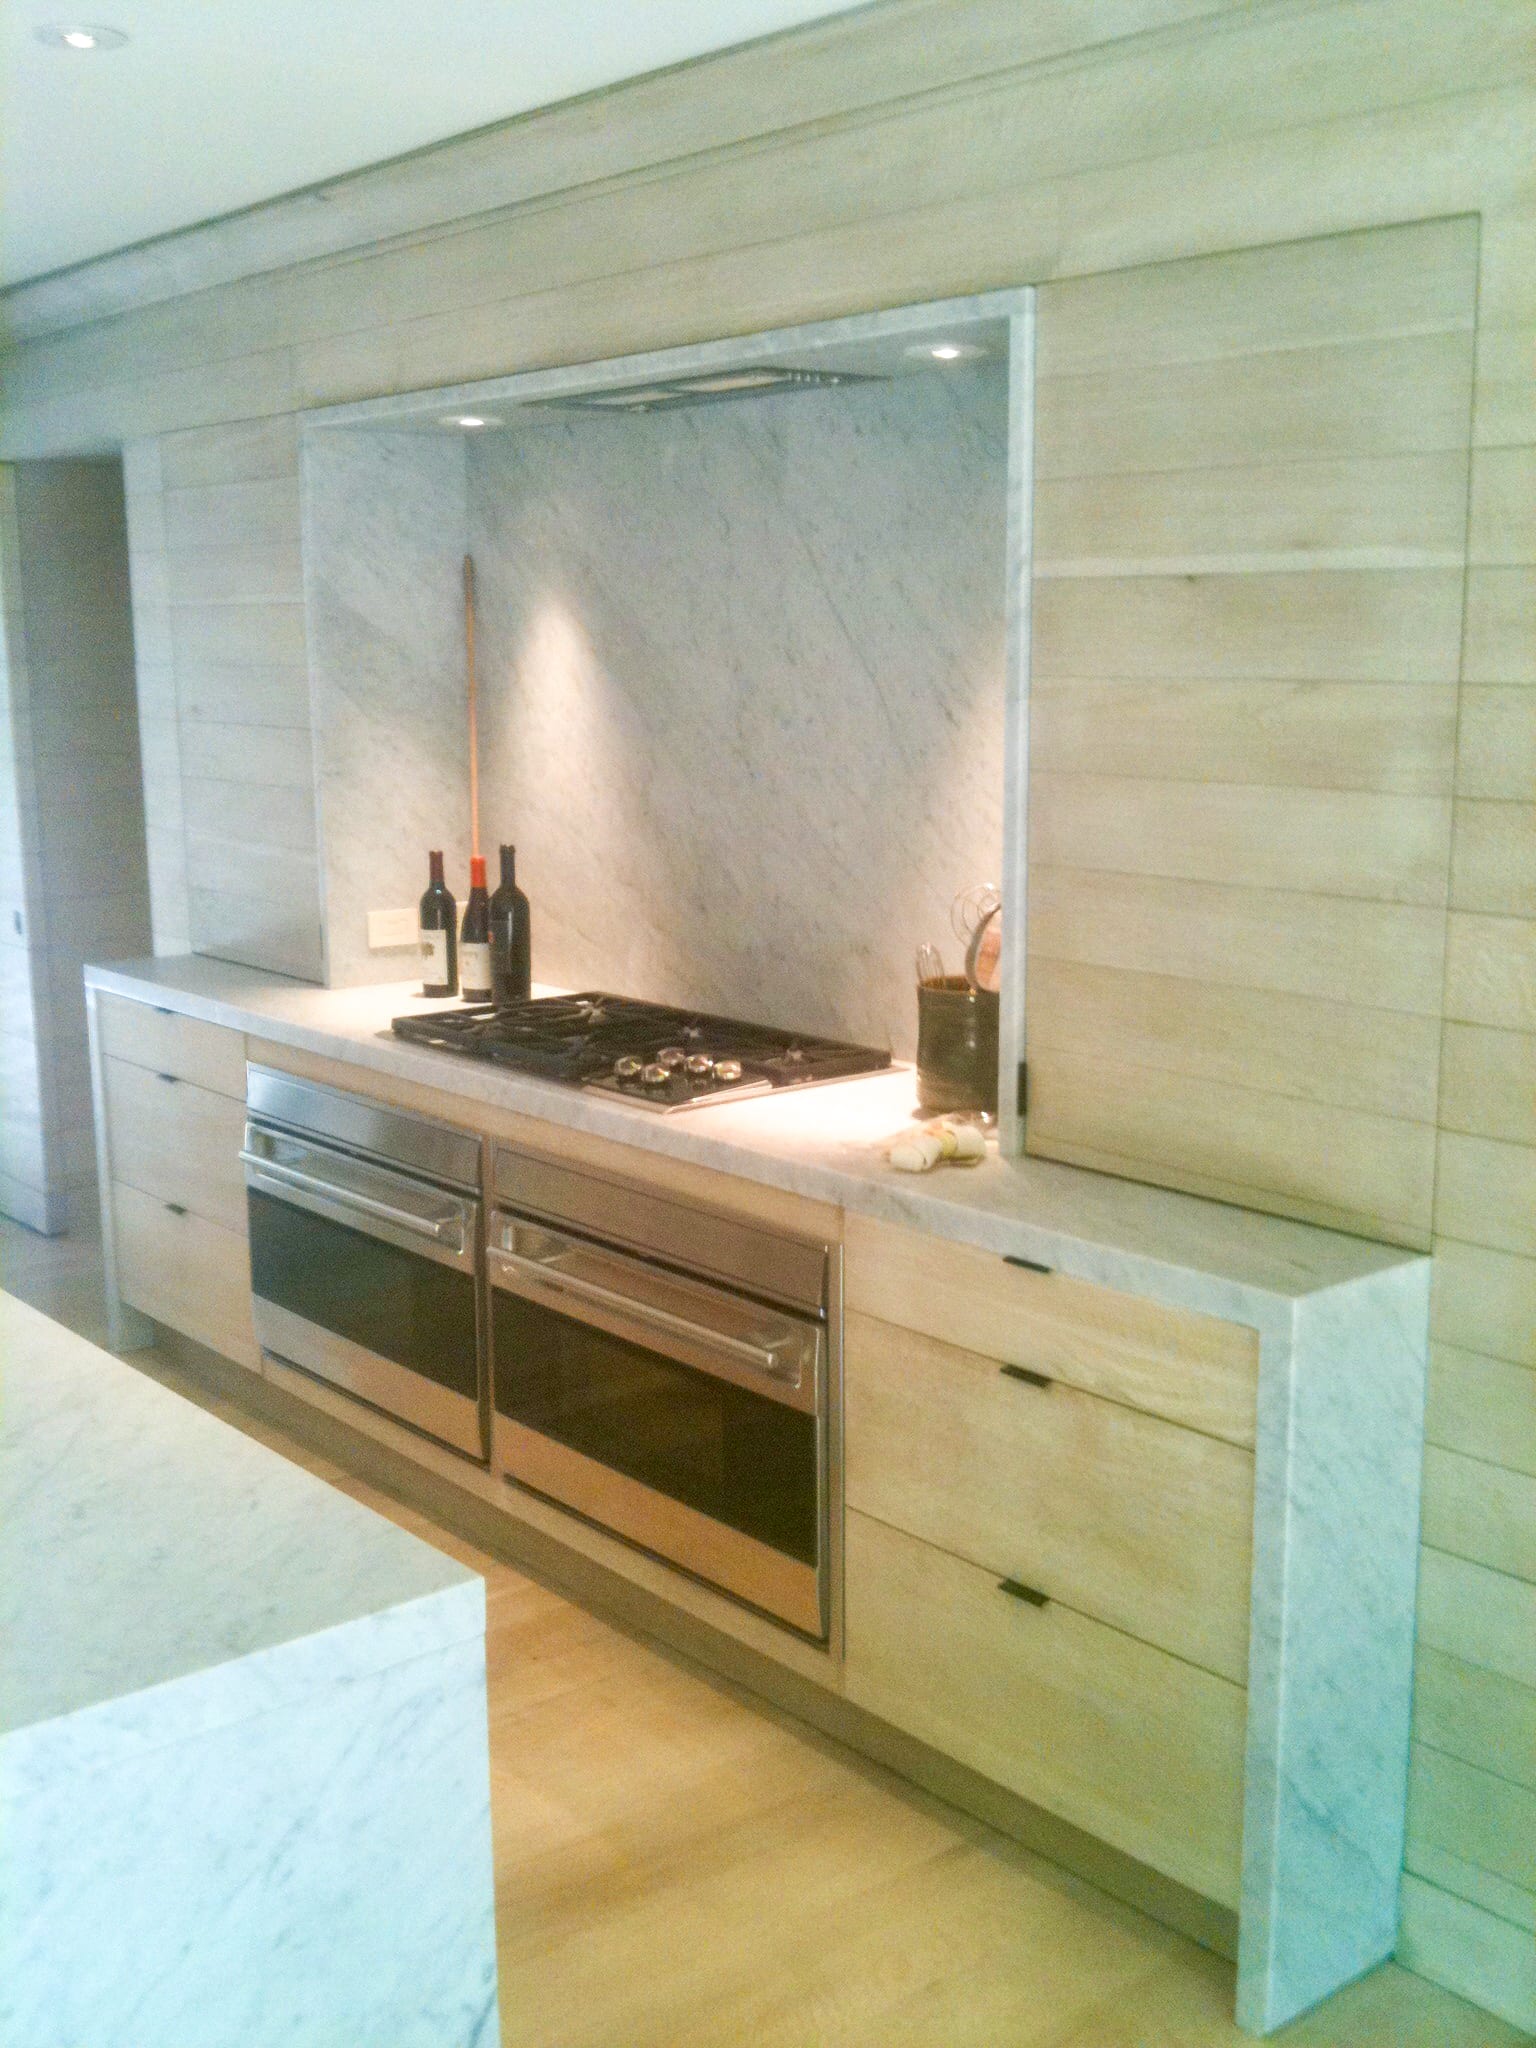 Paneled Light Wood kitchen with grey marble accents